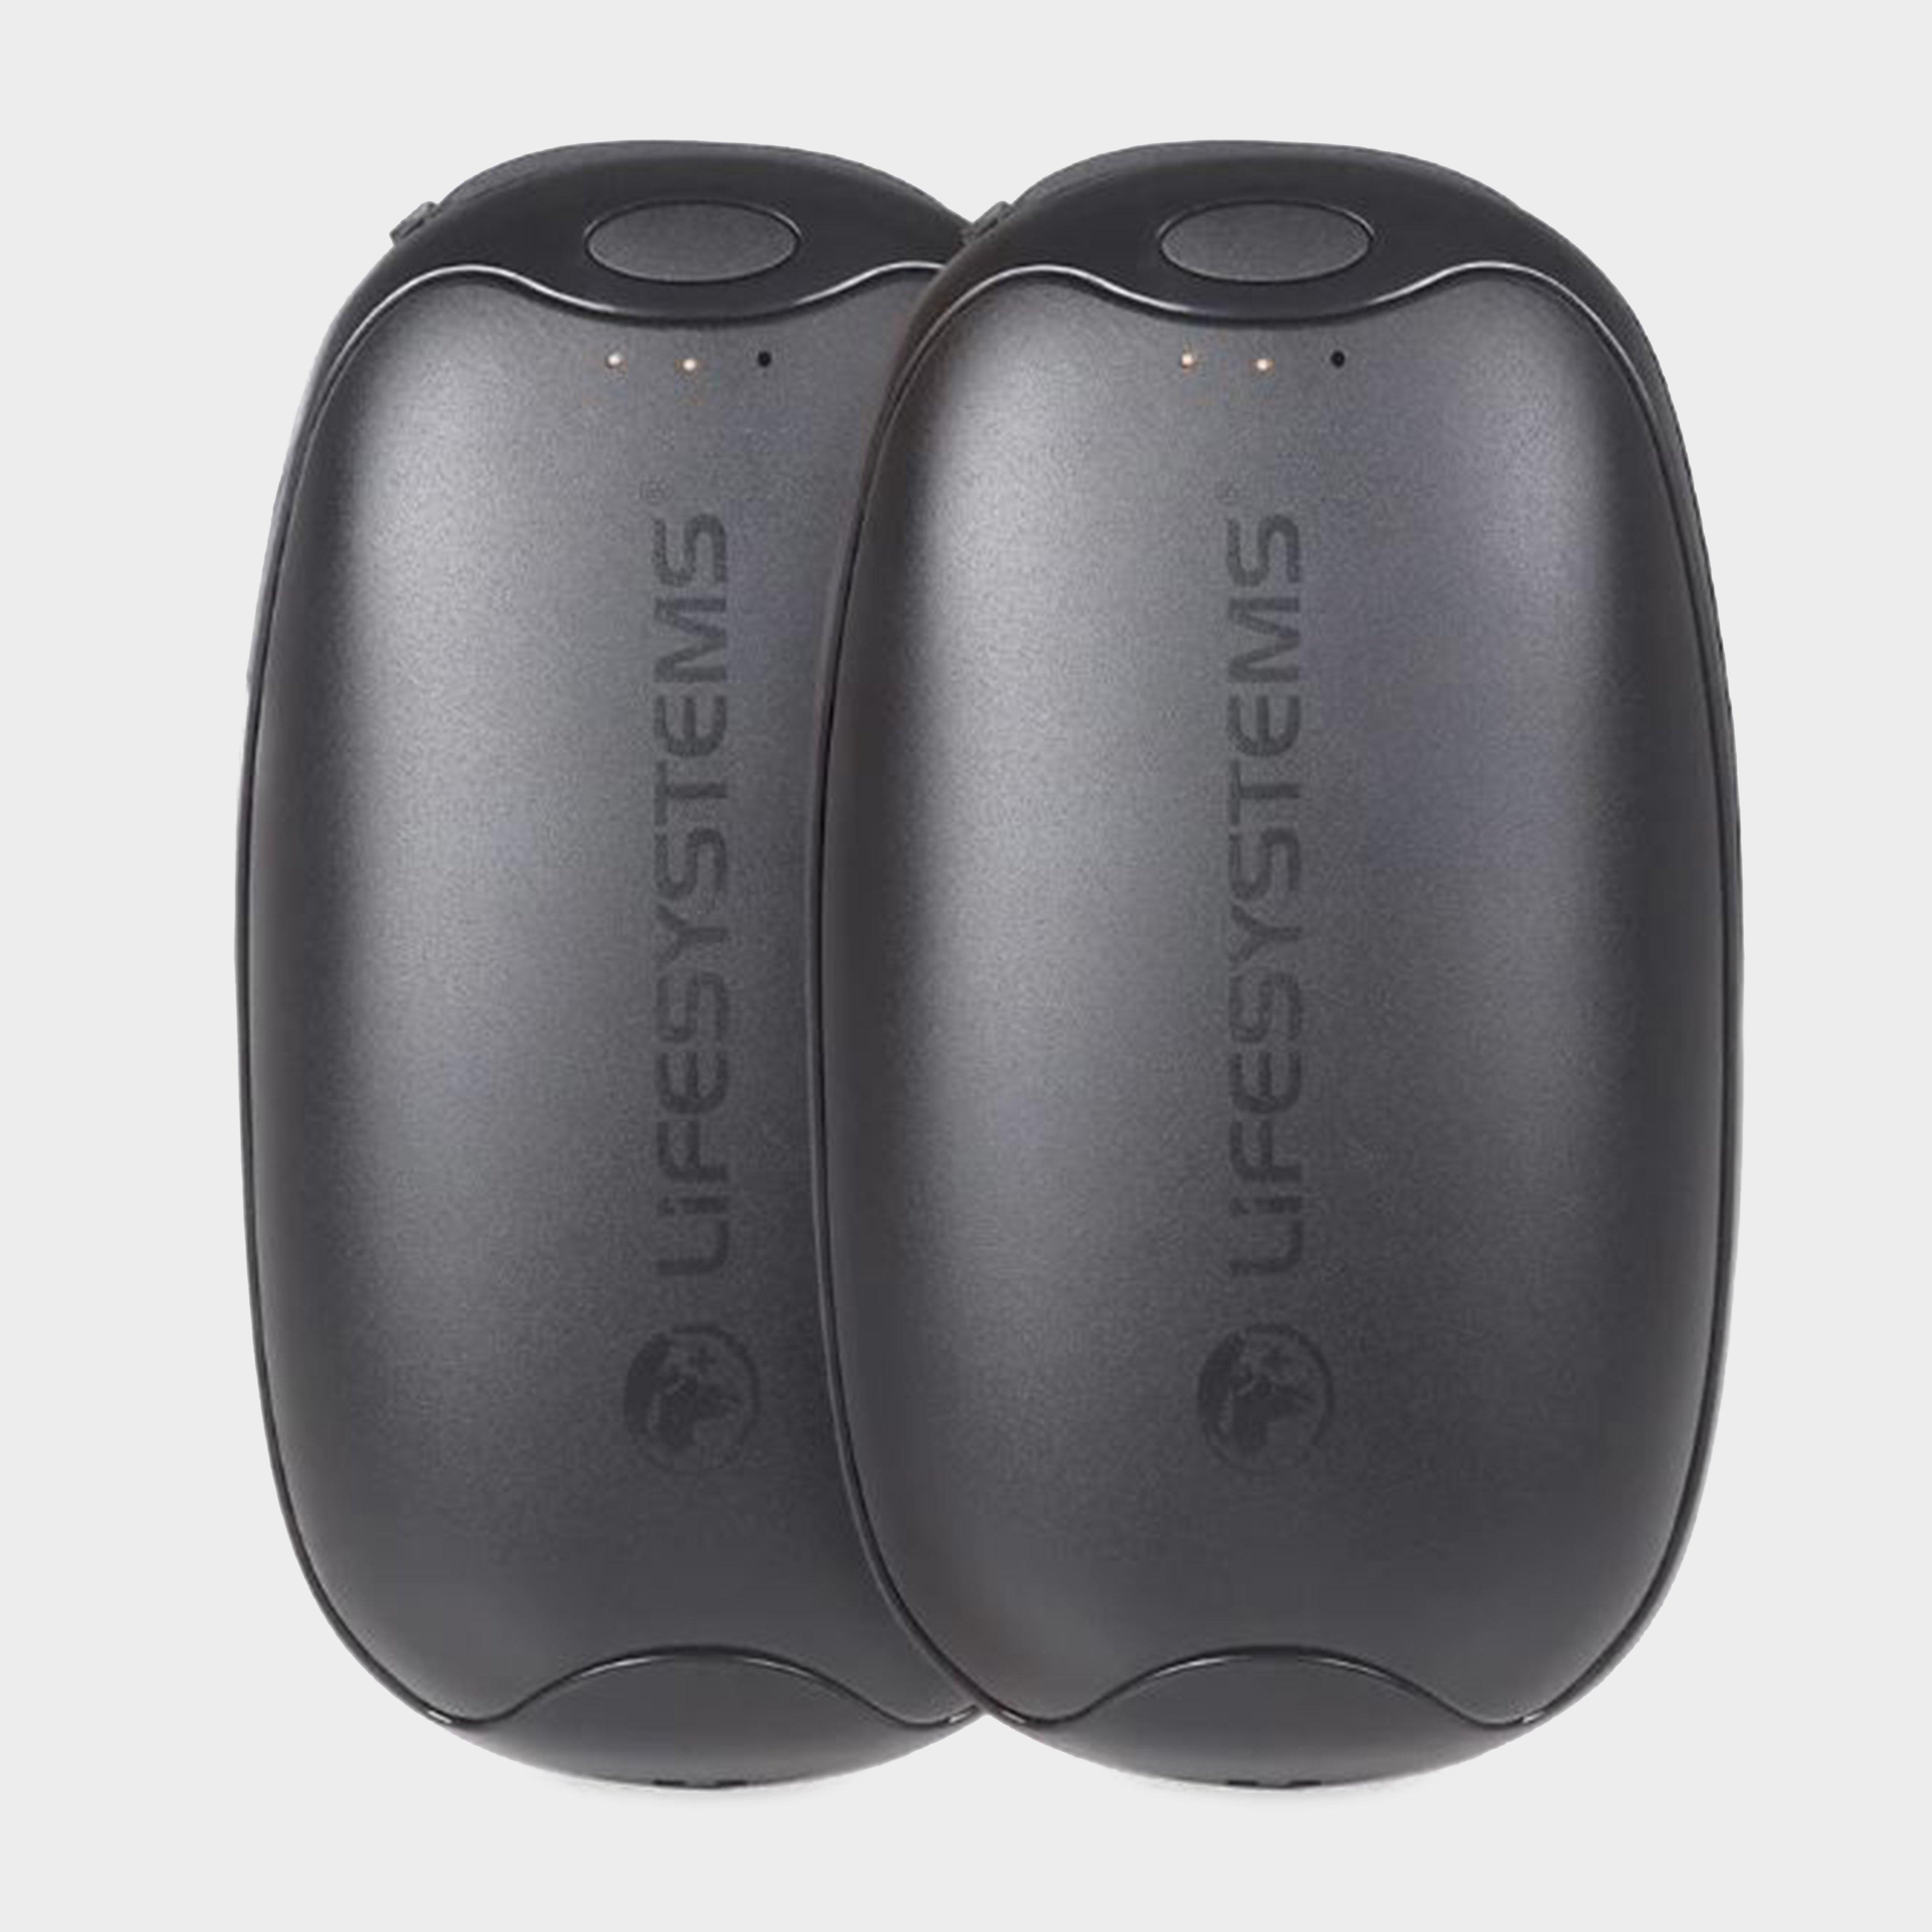 Lifesystems Lifesystems Dual-Palm Rechargeable Hand Warmers - Pair, PAIR